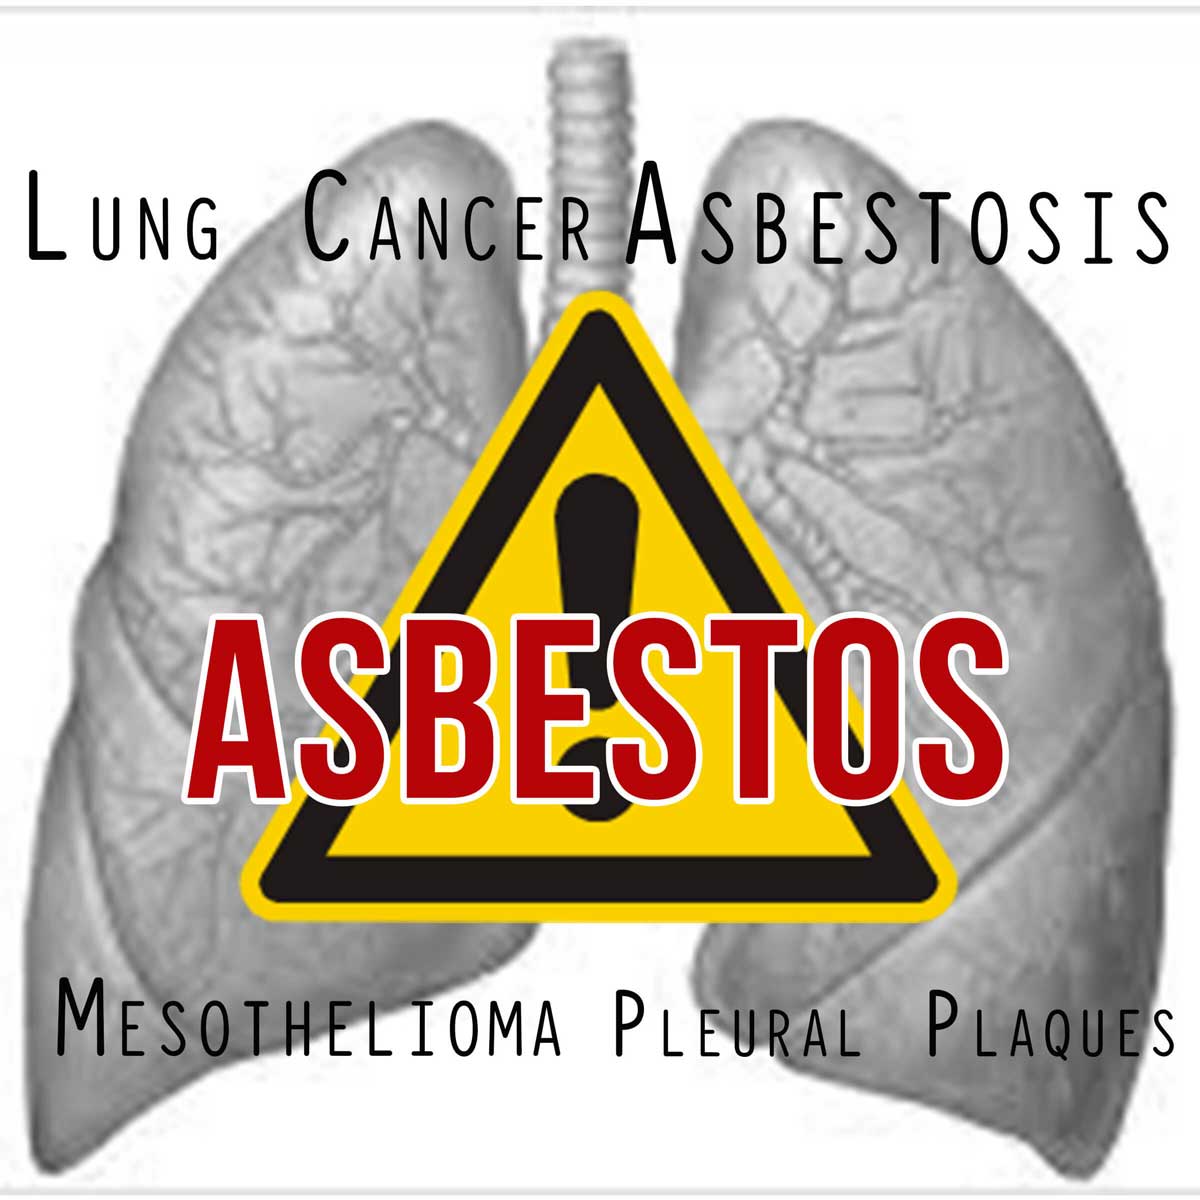 Lung Cancer Asbestosis